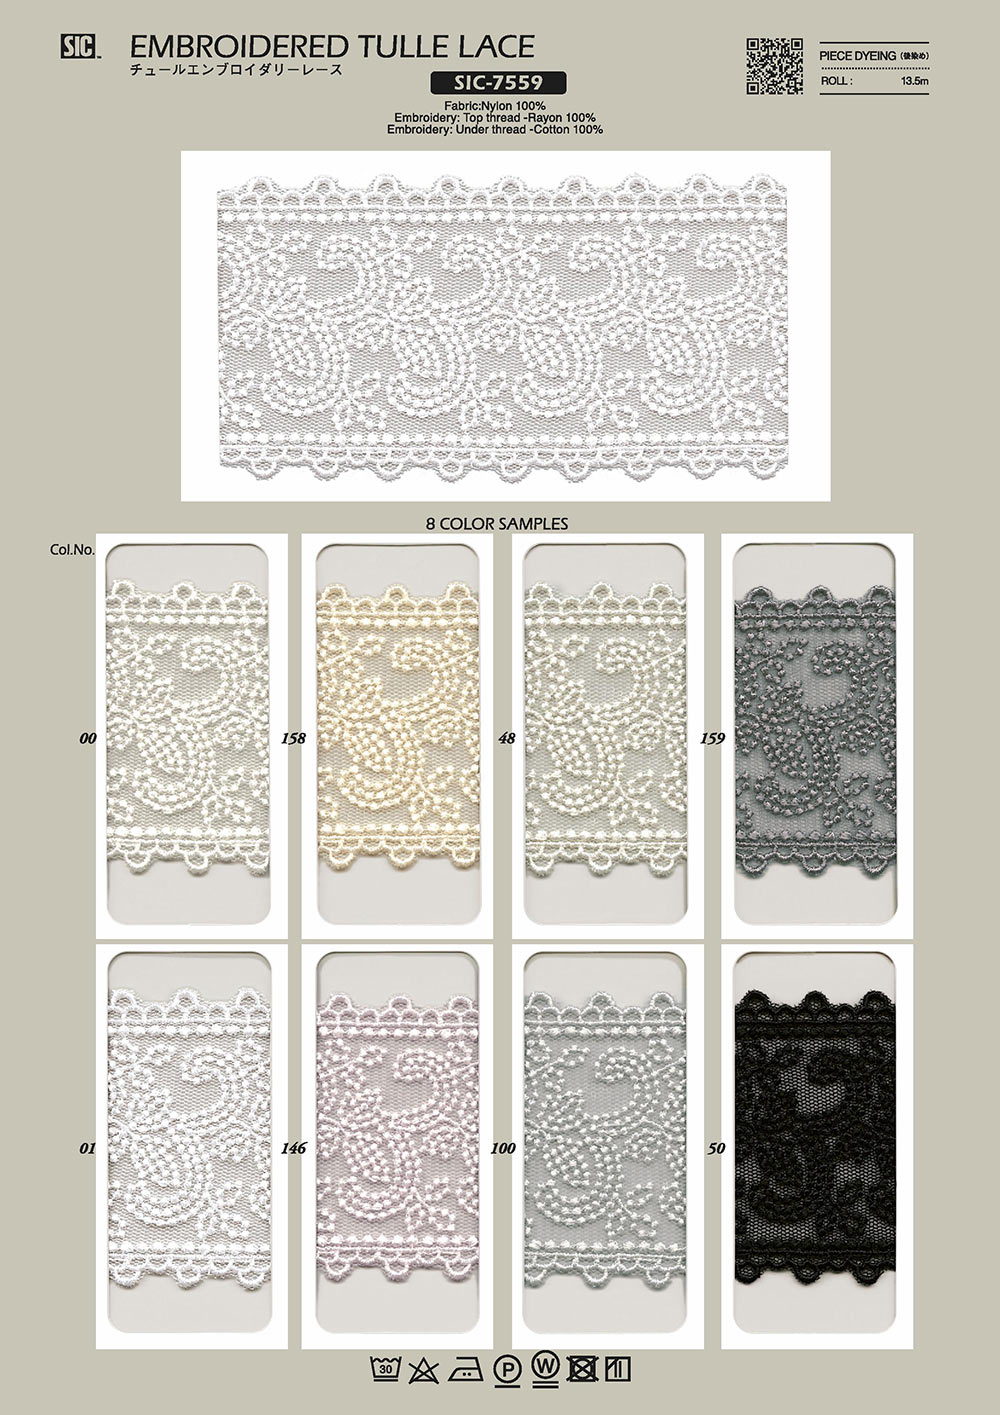 SIC-7559 Tulle Embroidery Lace/ 60mm SHINDO(SIC)